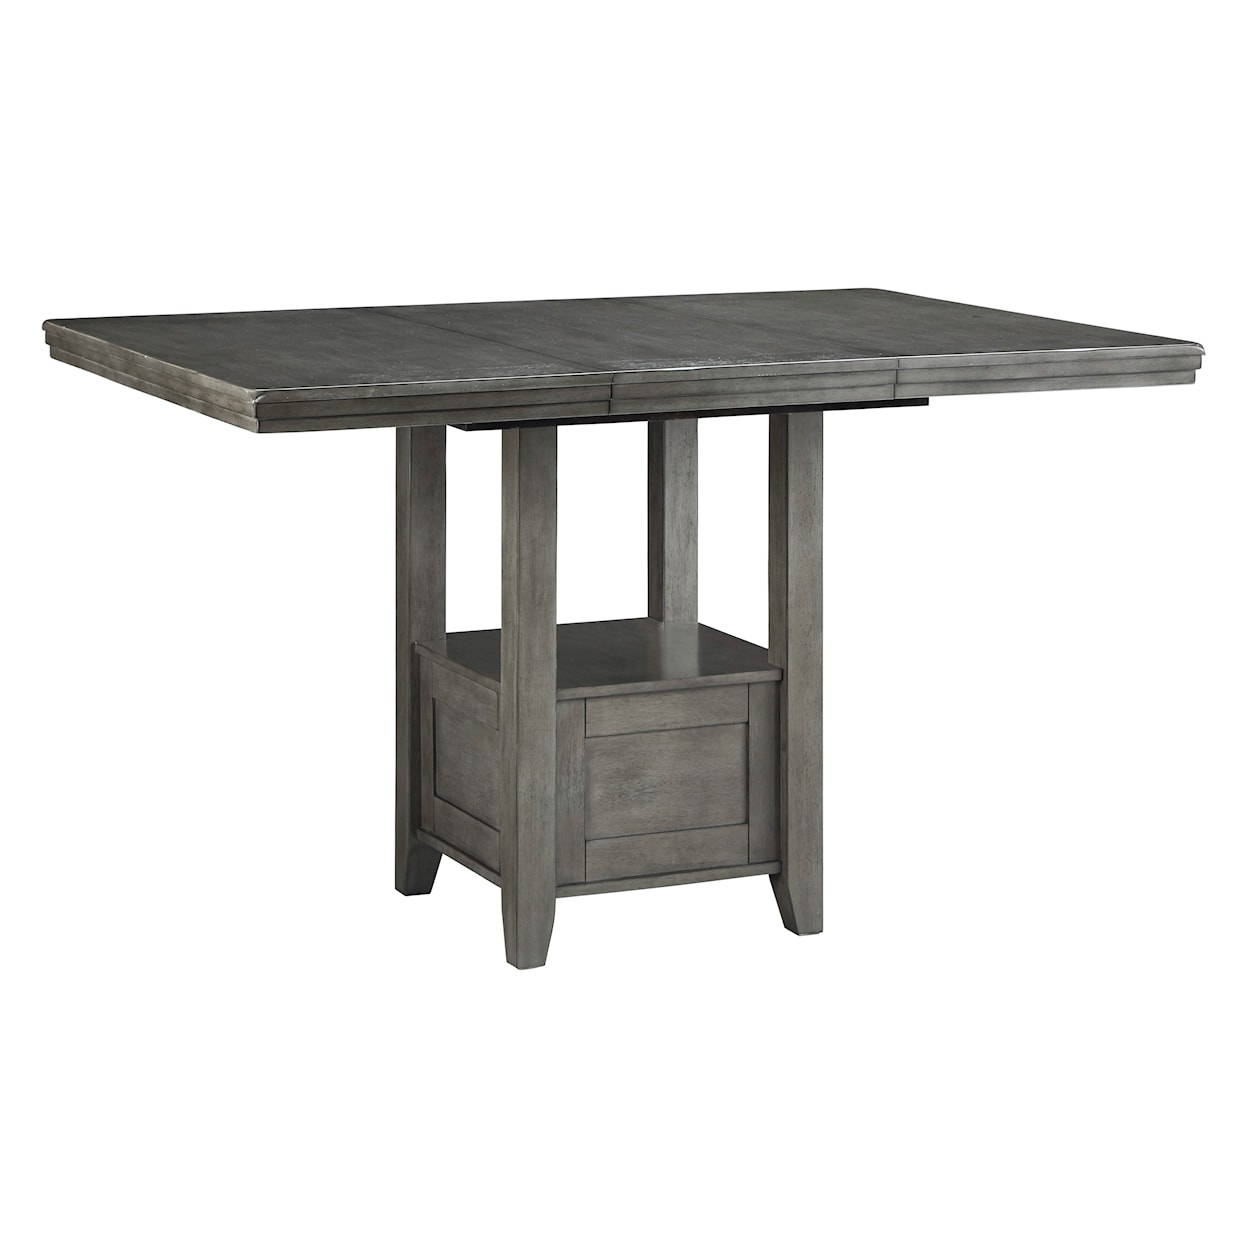 Michael Alan Select Hallanden Counter Height Dining Extension Table